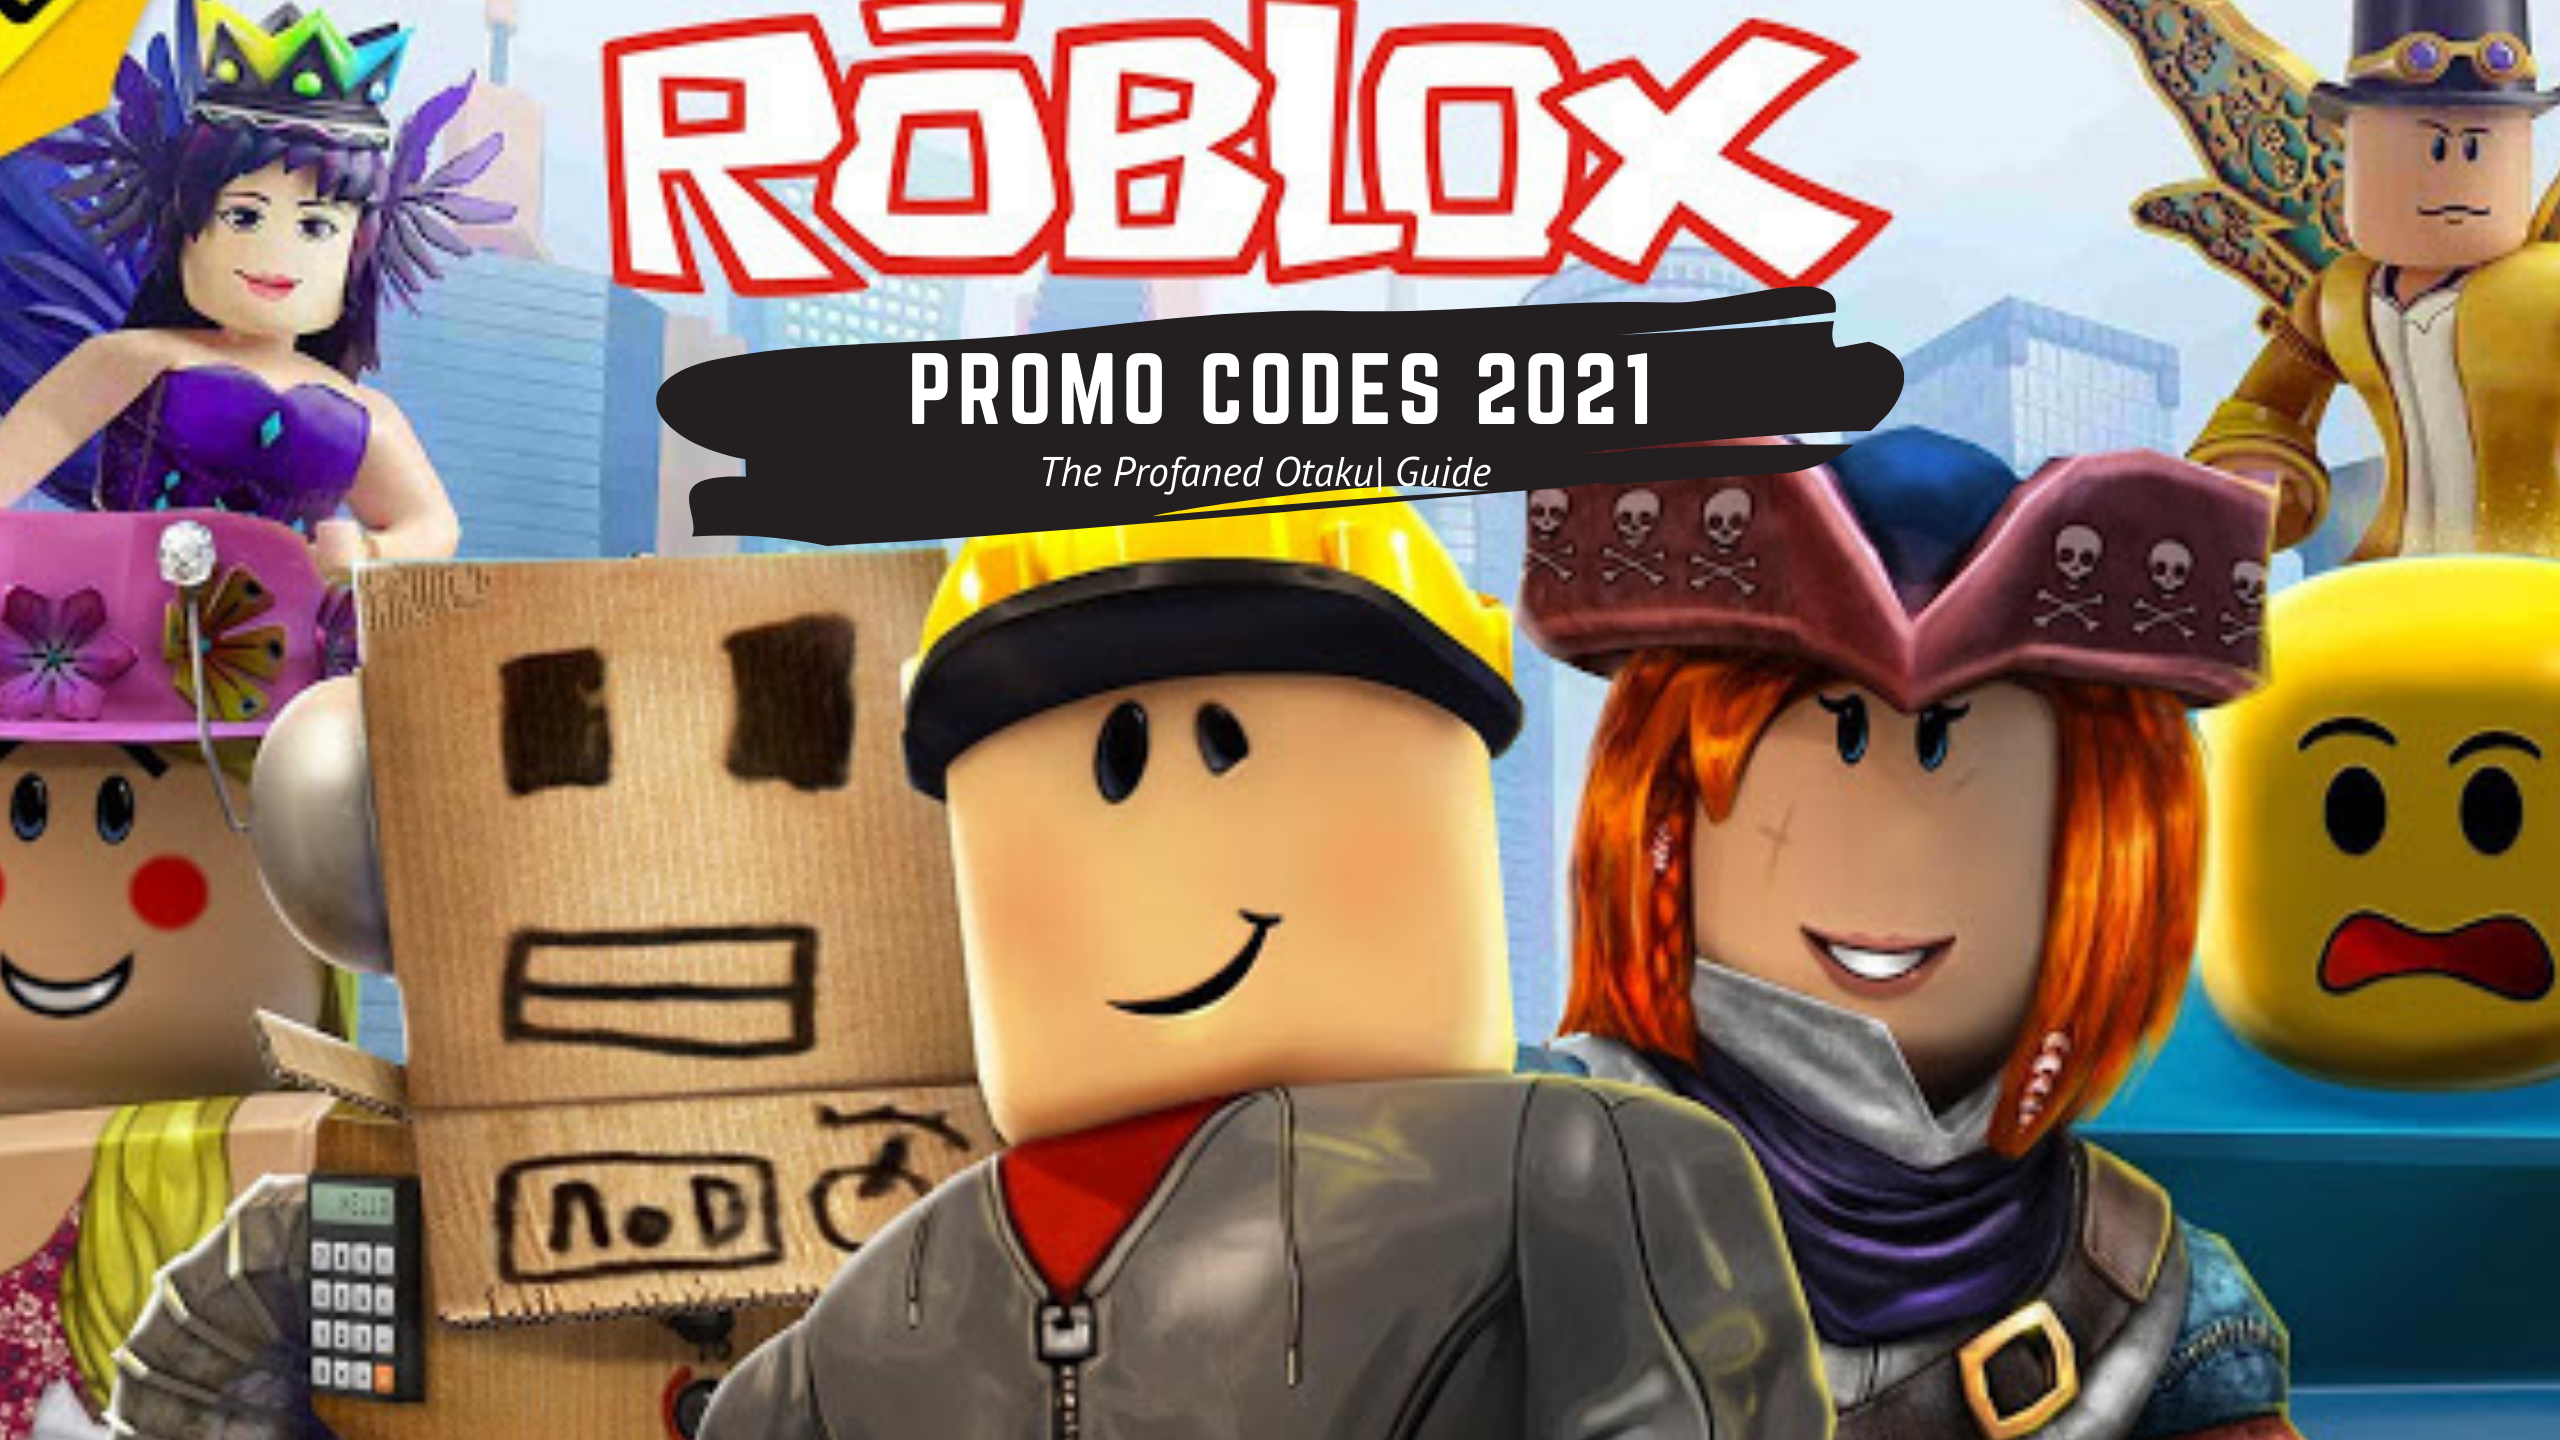 Roblox Promo Codes 2021 The Profaned Otaku - how to redeem codes in roblox 2021